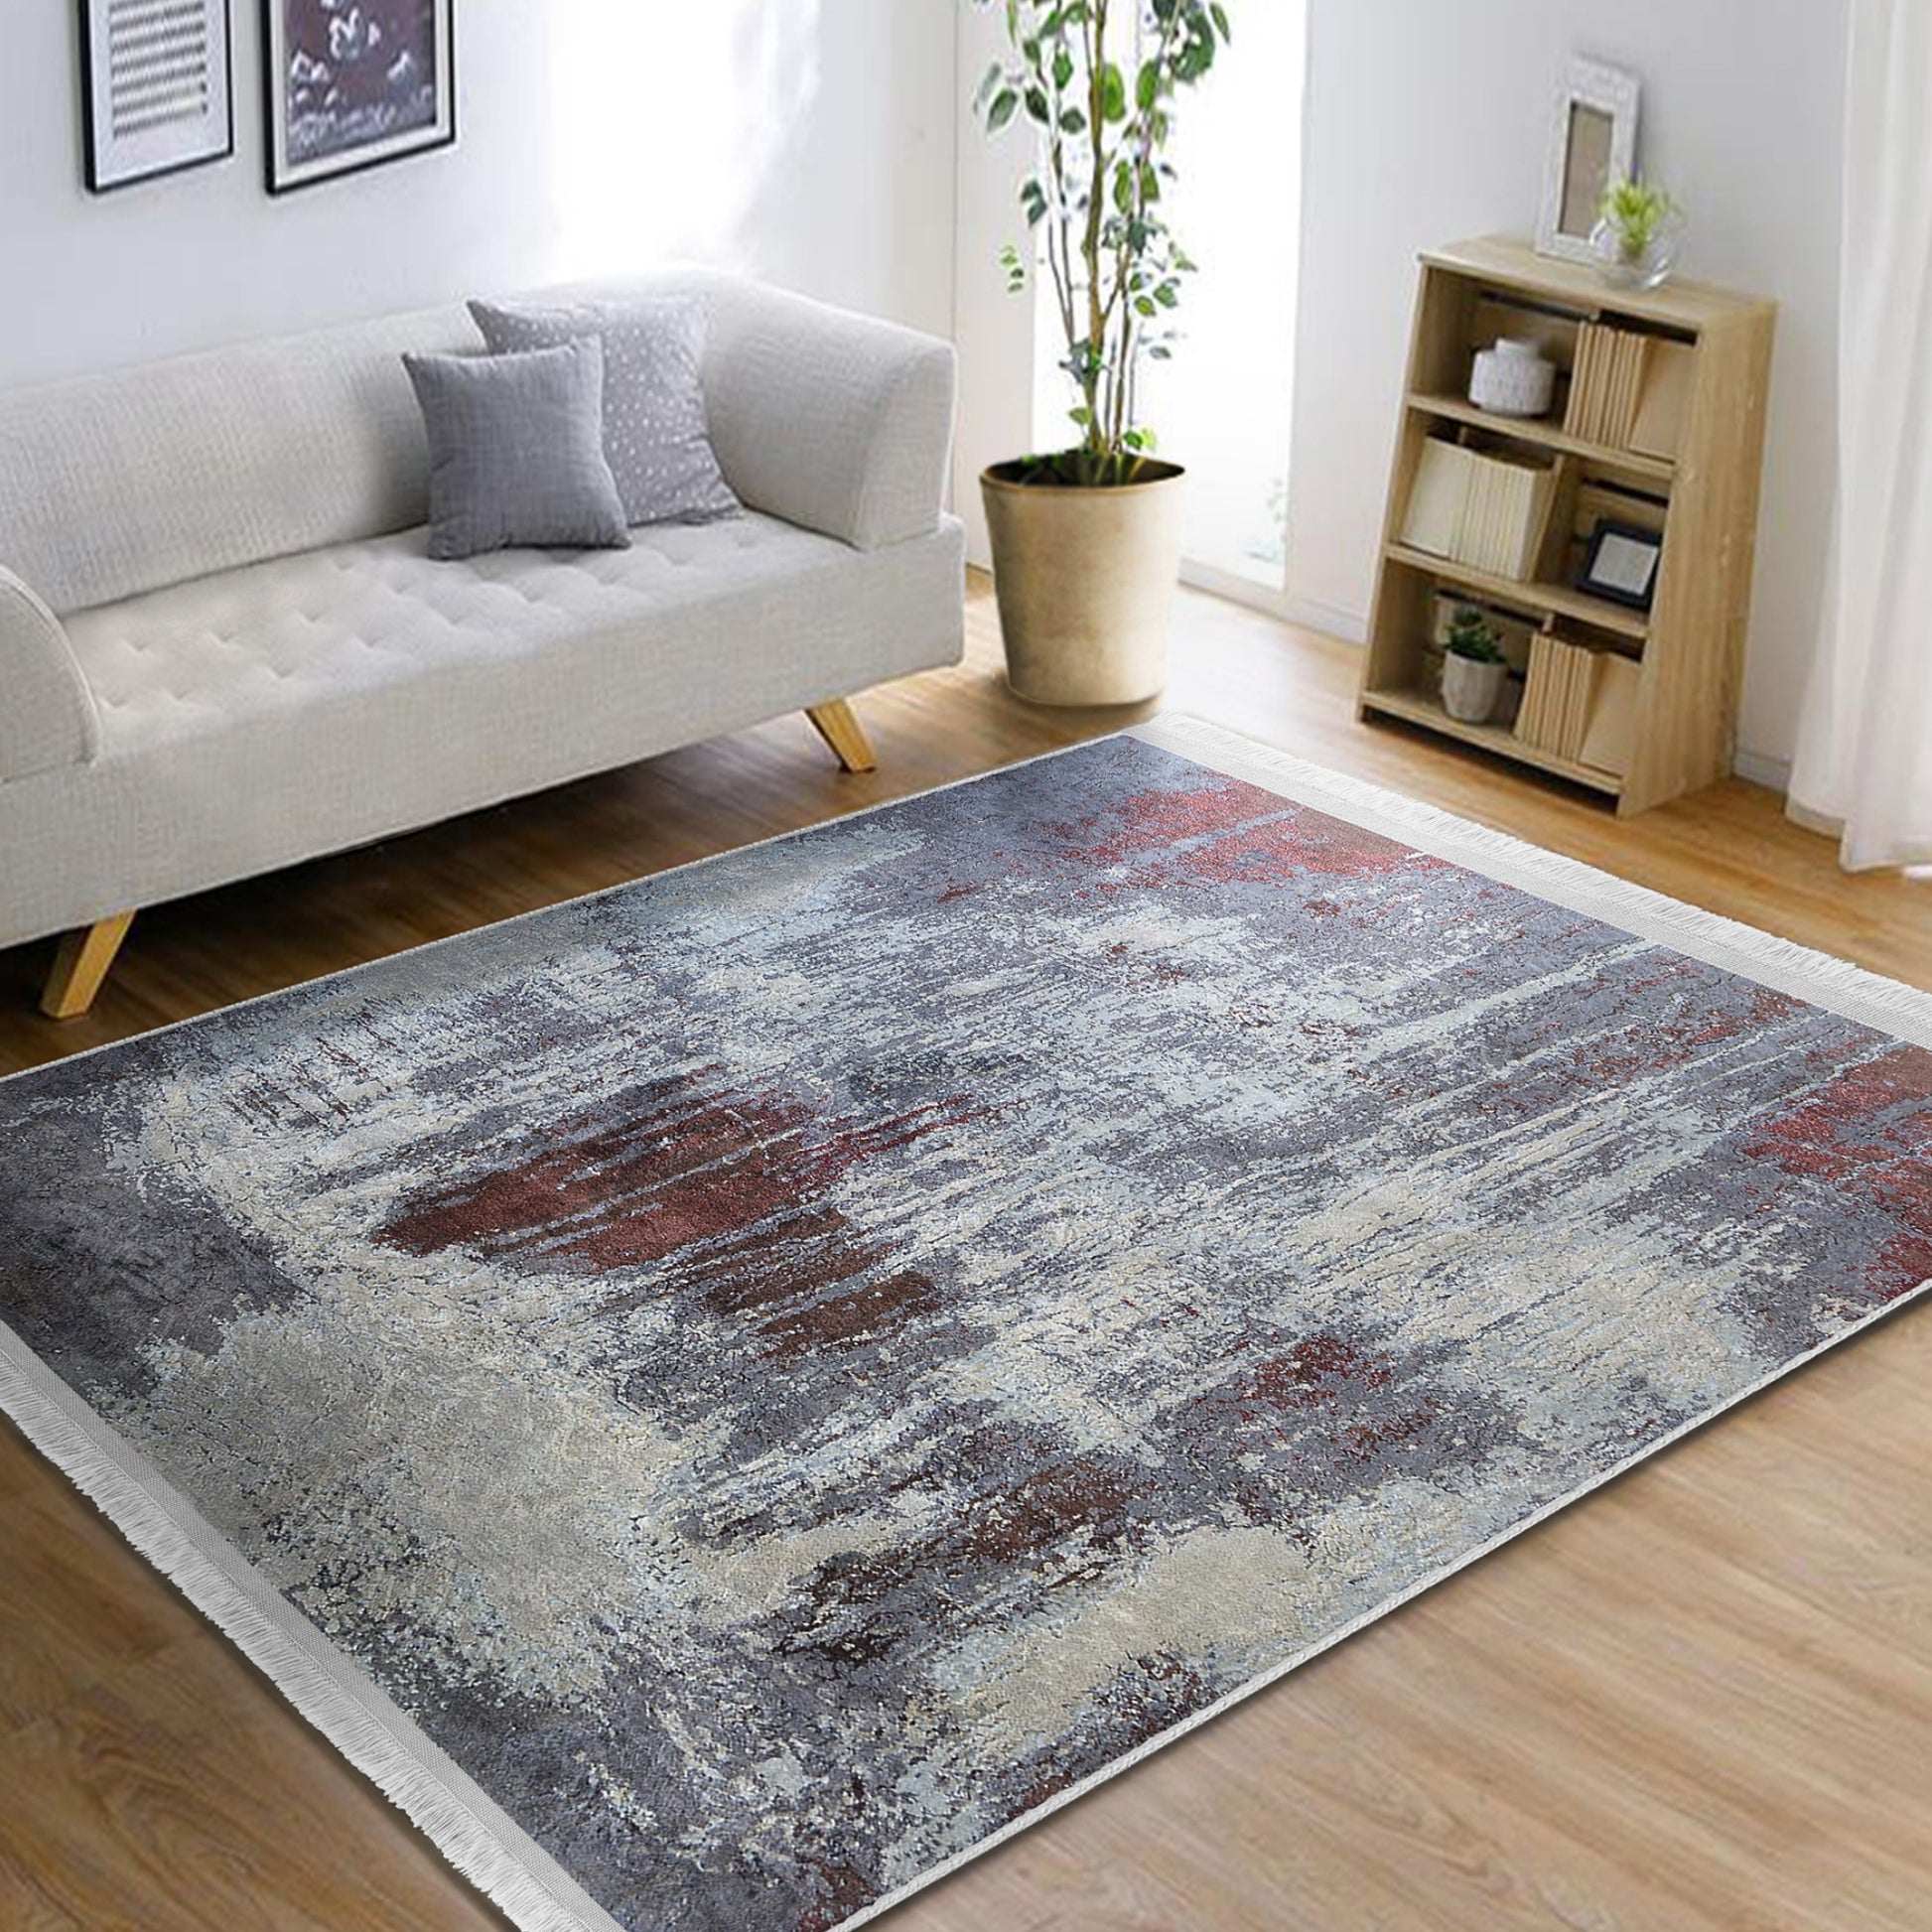 Cozy Rustic Decor Rug for Home